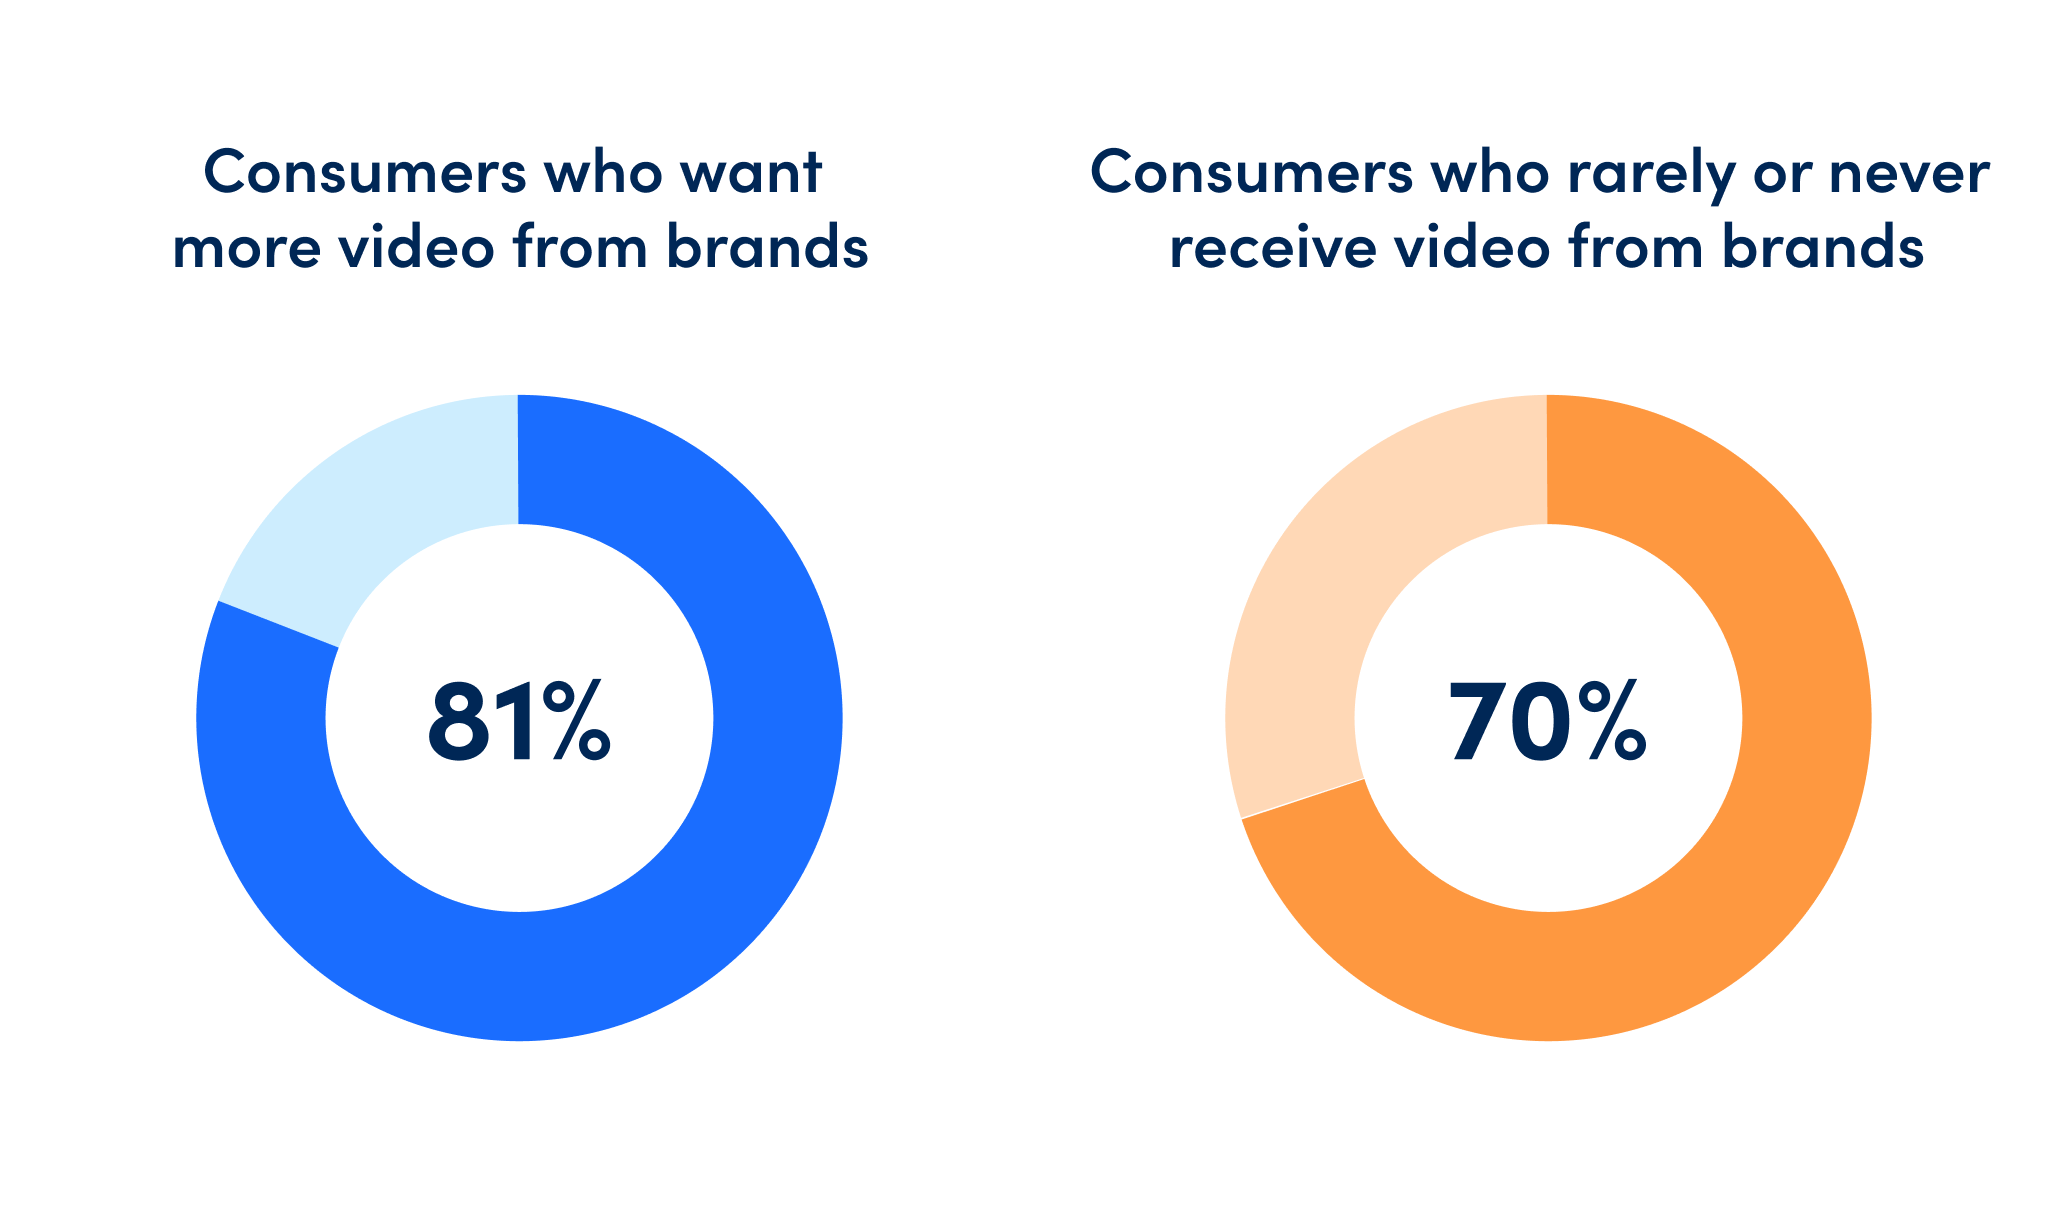 Consumers who want more video from brands